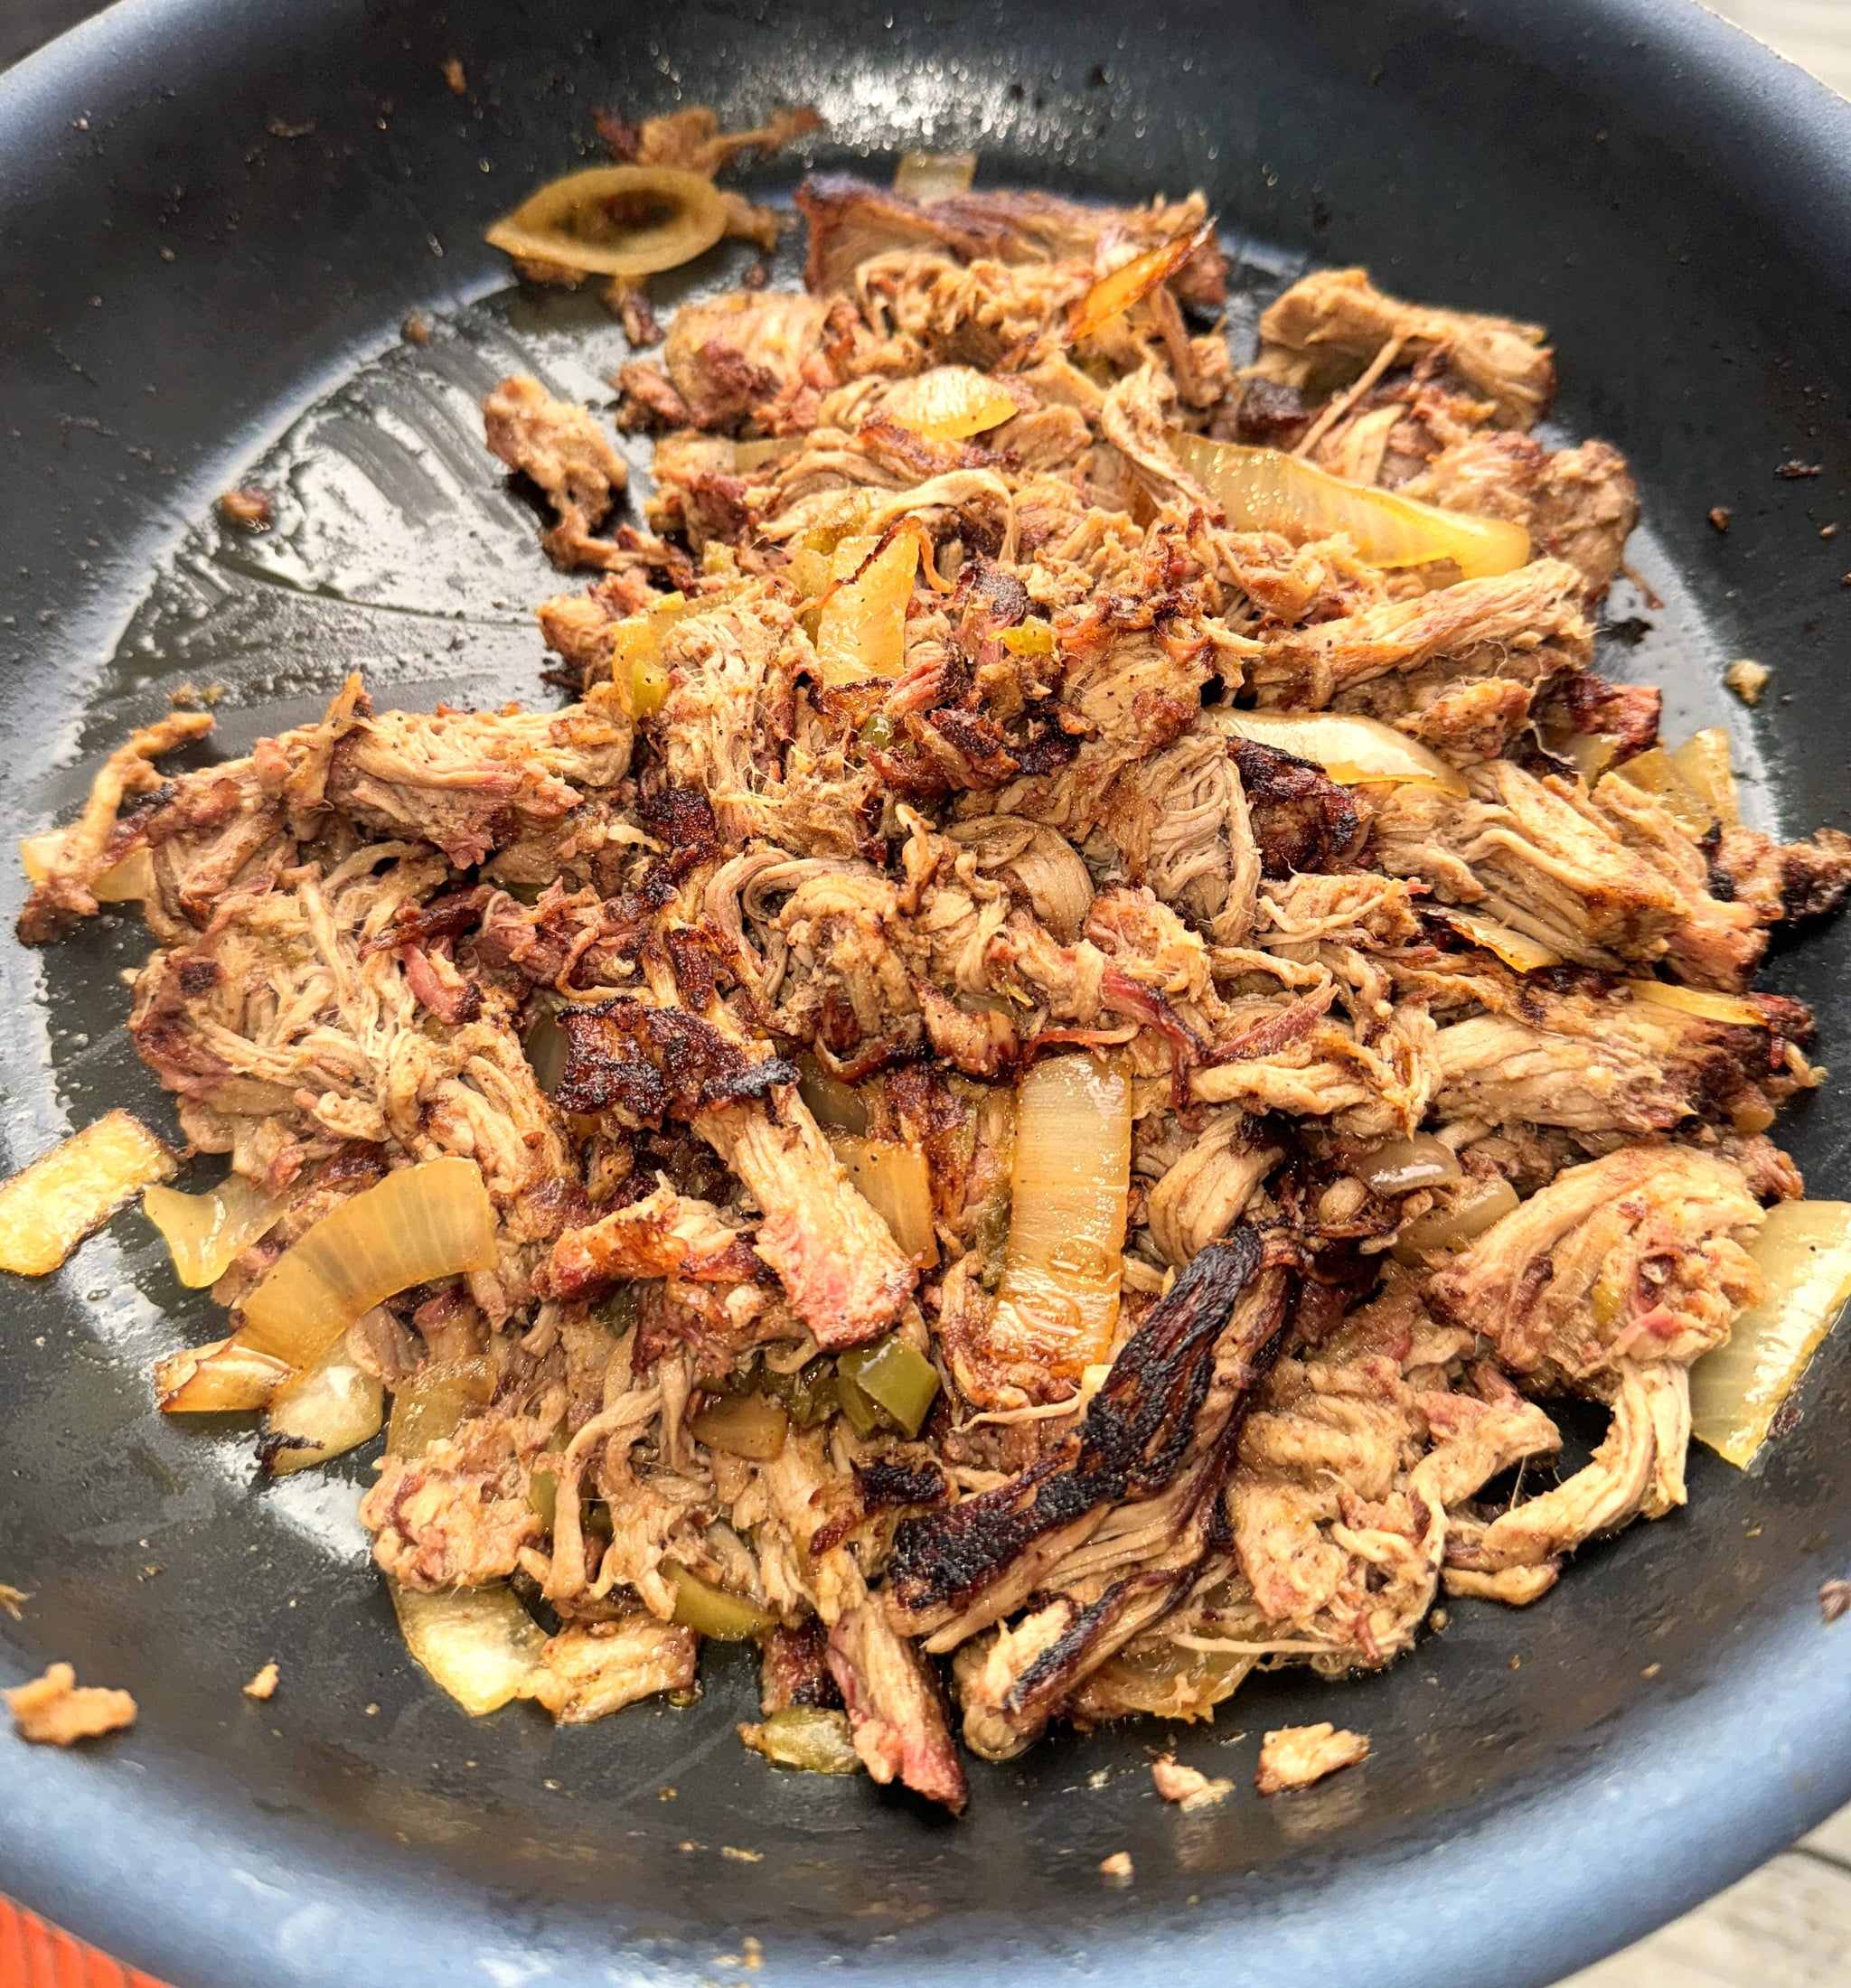 What is Carnitas?